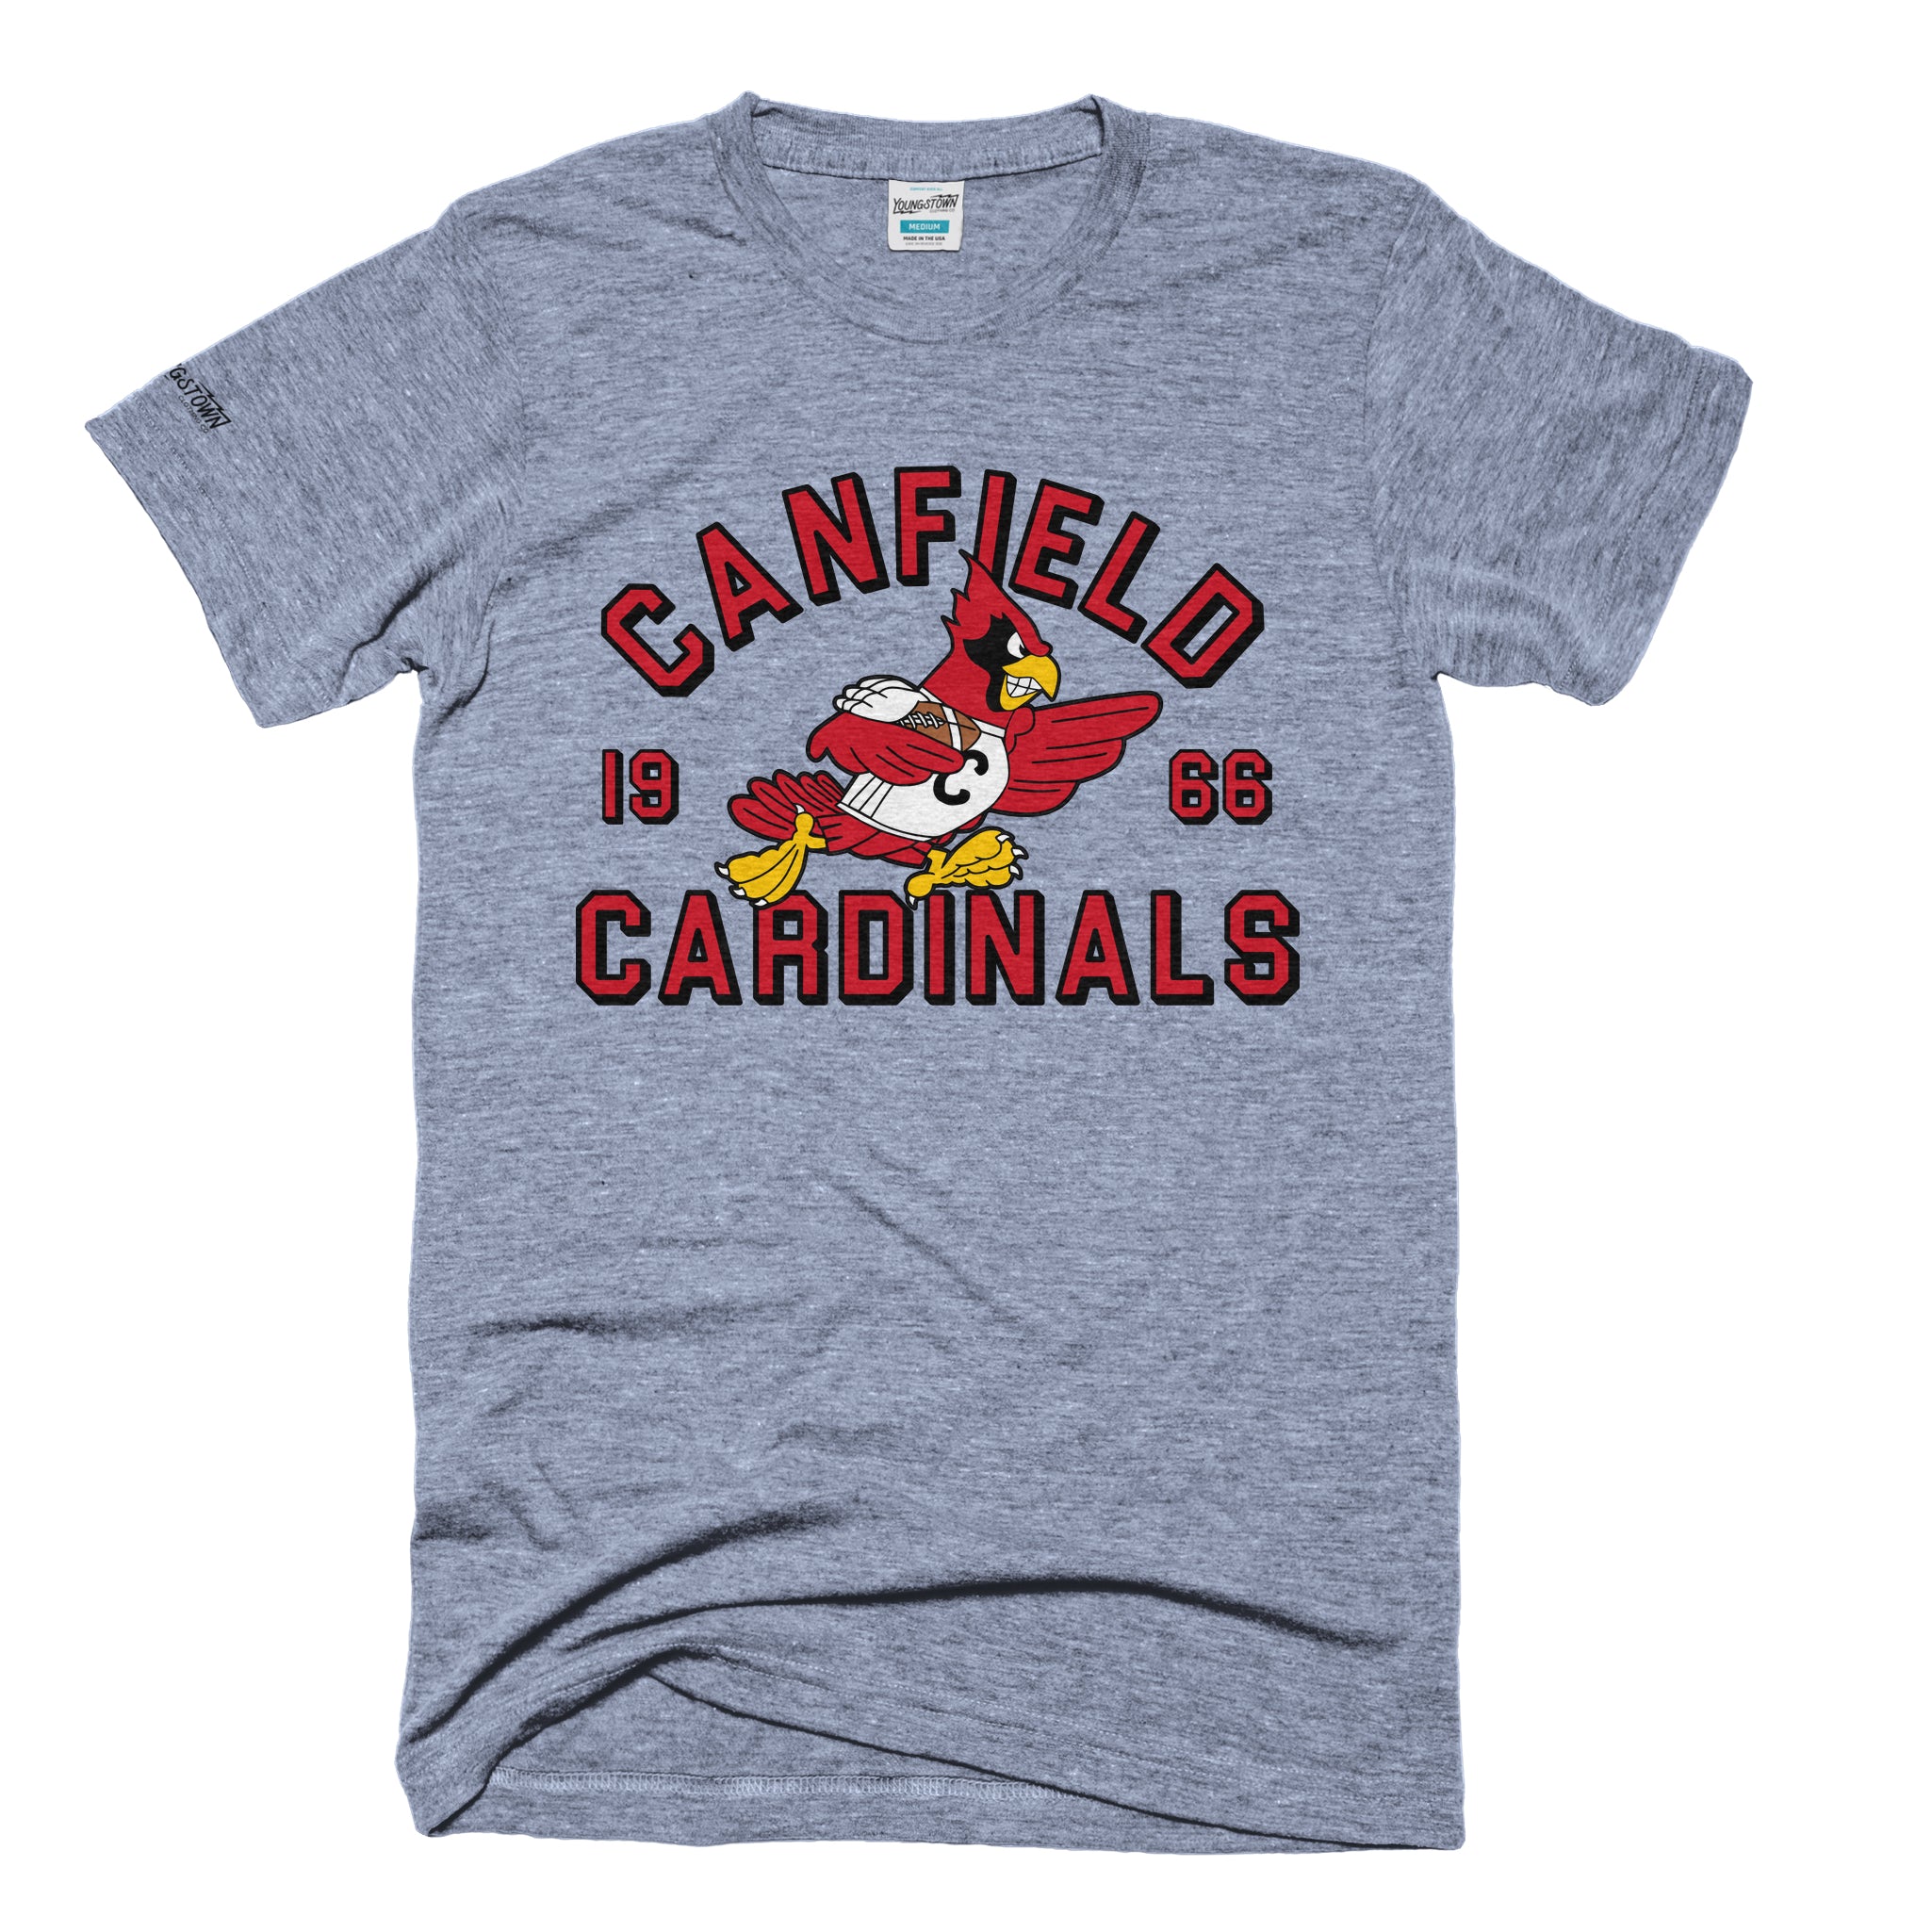 Youth Red Louisville Cardinals Vintage T-Shirt